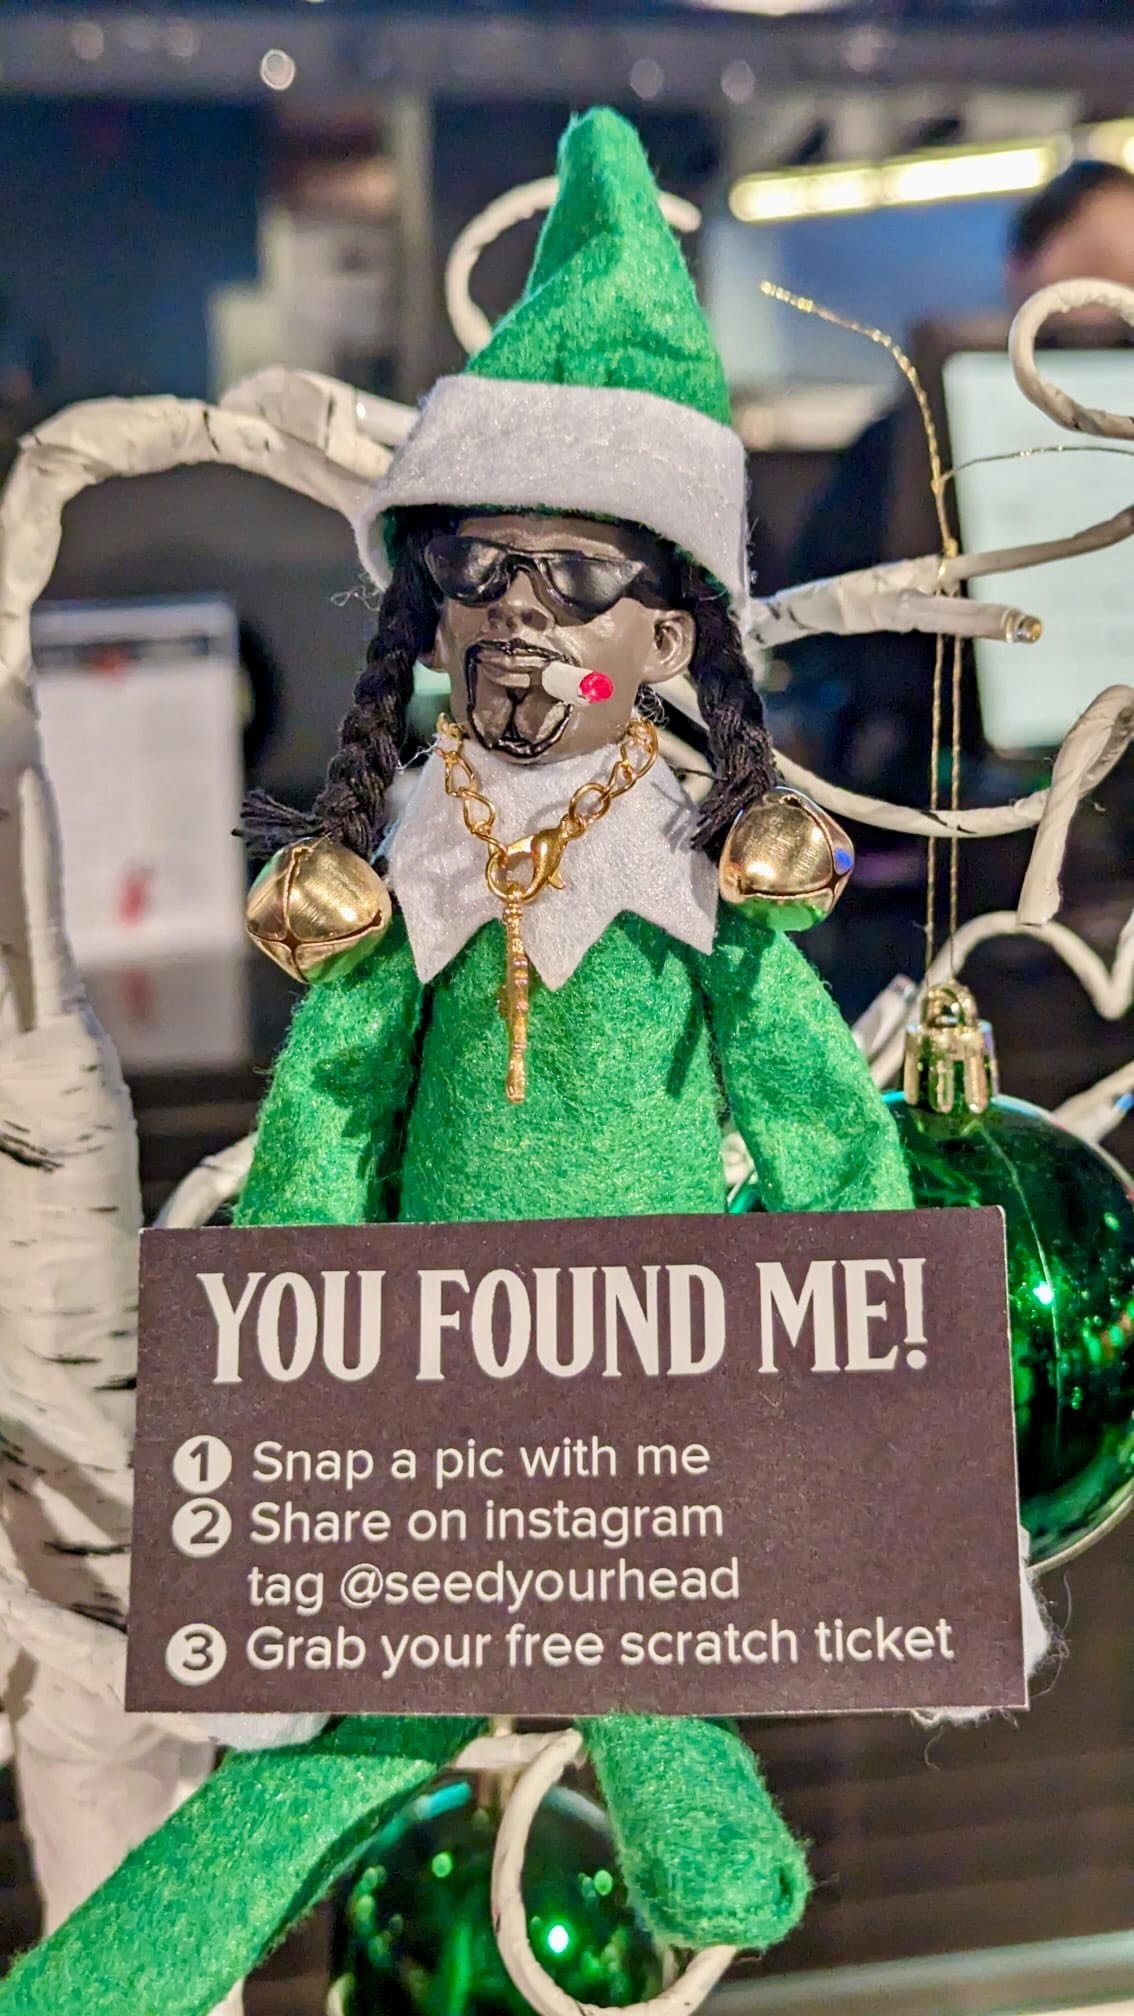 Snoopin for snoop! 

Join the hunt for on a Stoop at Seed + Core

Spot me in different museum spots
1. snap a pic
2. share it on Insta
3.Tag @seedyourhead, use 4. Grab your FREE scratch ticket for a chance to win cool prizes! 

Let the Snoop search begin!